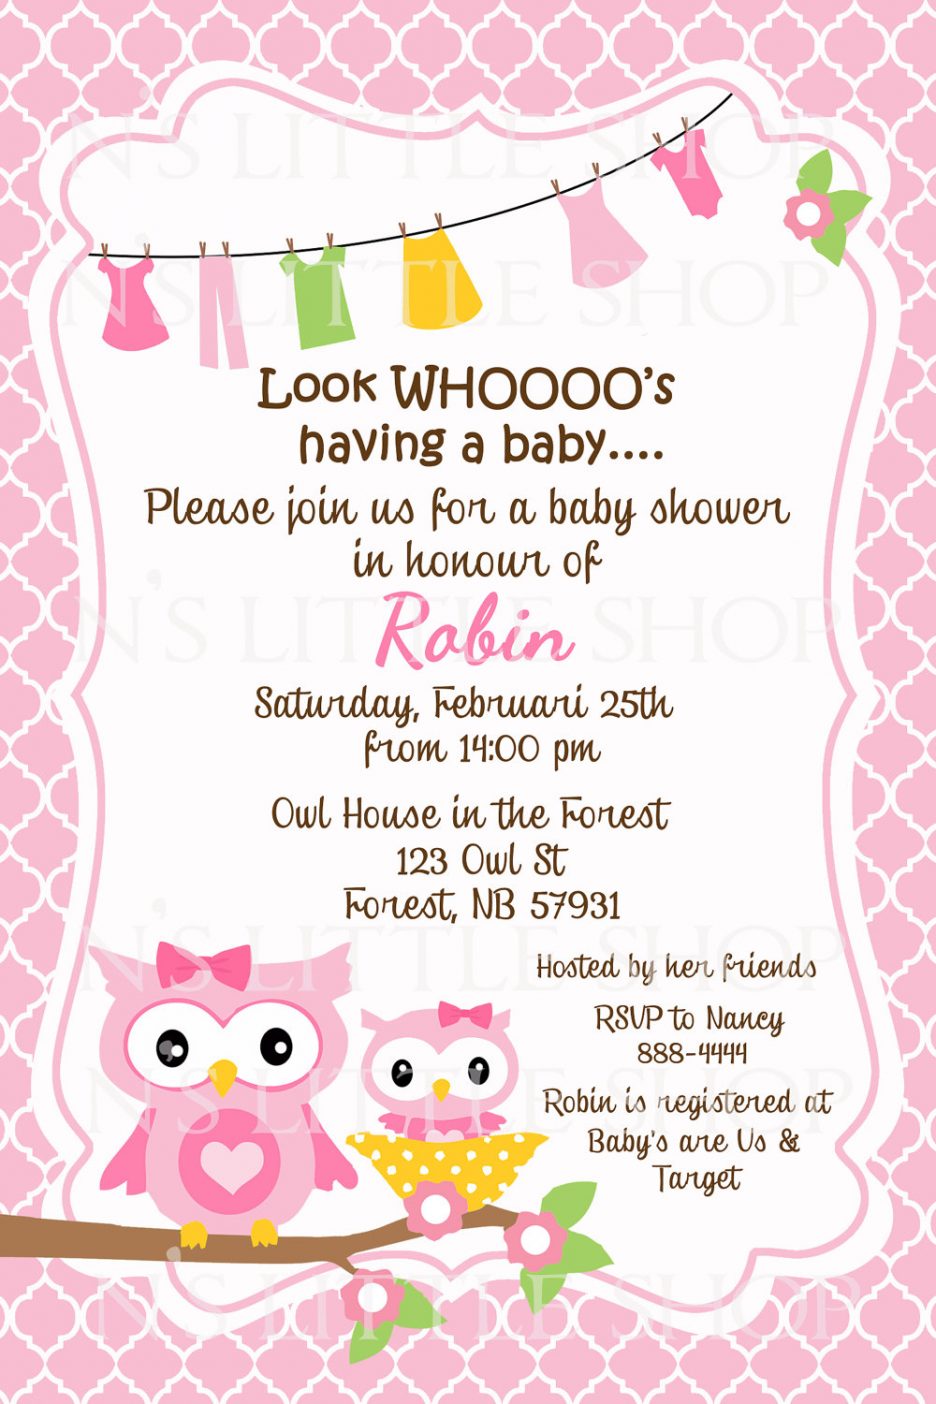 Full Size of Baby Shower:49+ Prime Baby Shower Card Message Photo Concepts Baby Shower Card Message How To Plan A Baby Shower Printable Baby Shower Cards Baby Shower De Niño Baby Shower Photos Baby Shower Verses Sample Beautiful Pink Owls Baby Shower Invitation Card For Baby